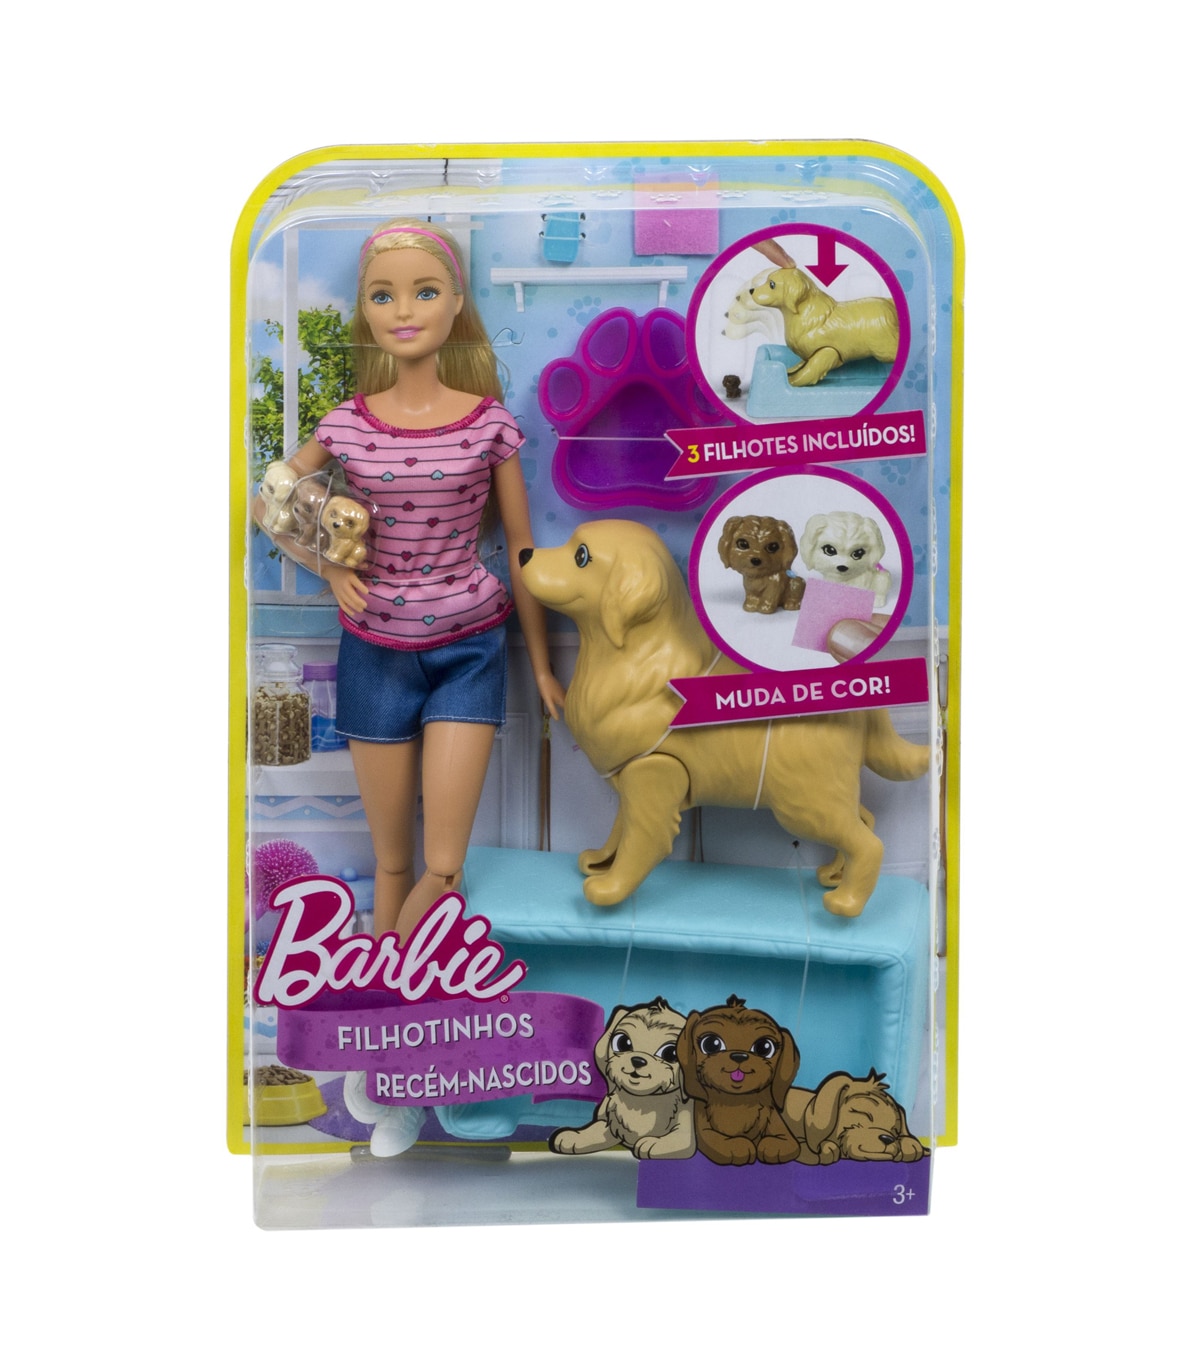 barbie doll dog has puppies